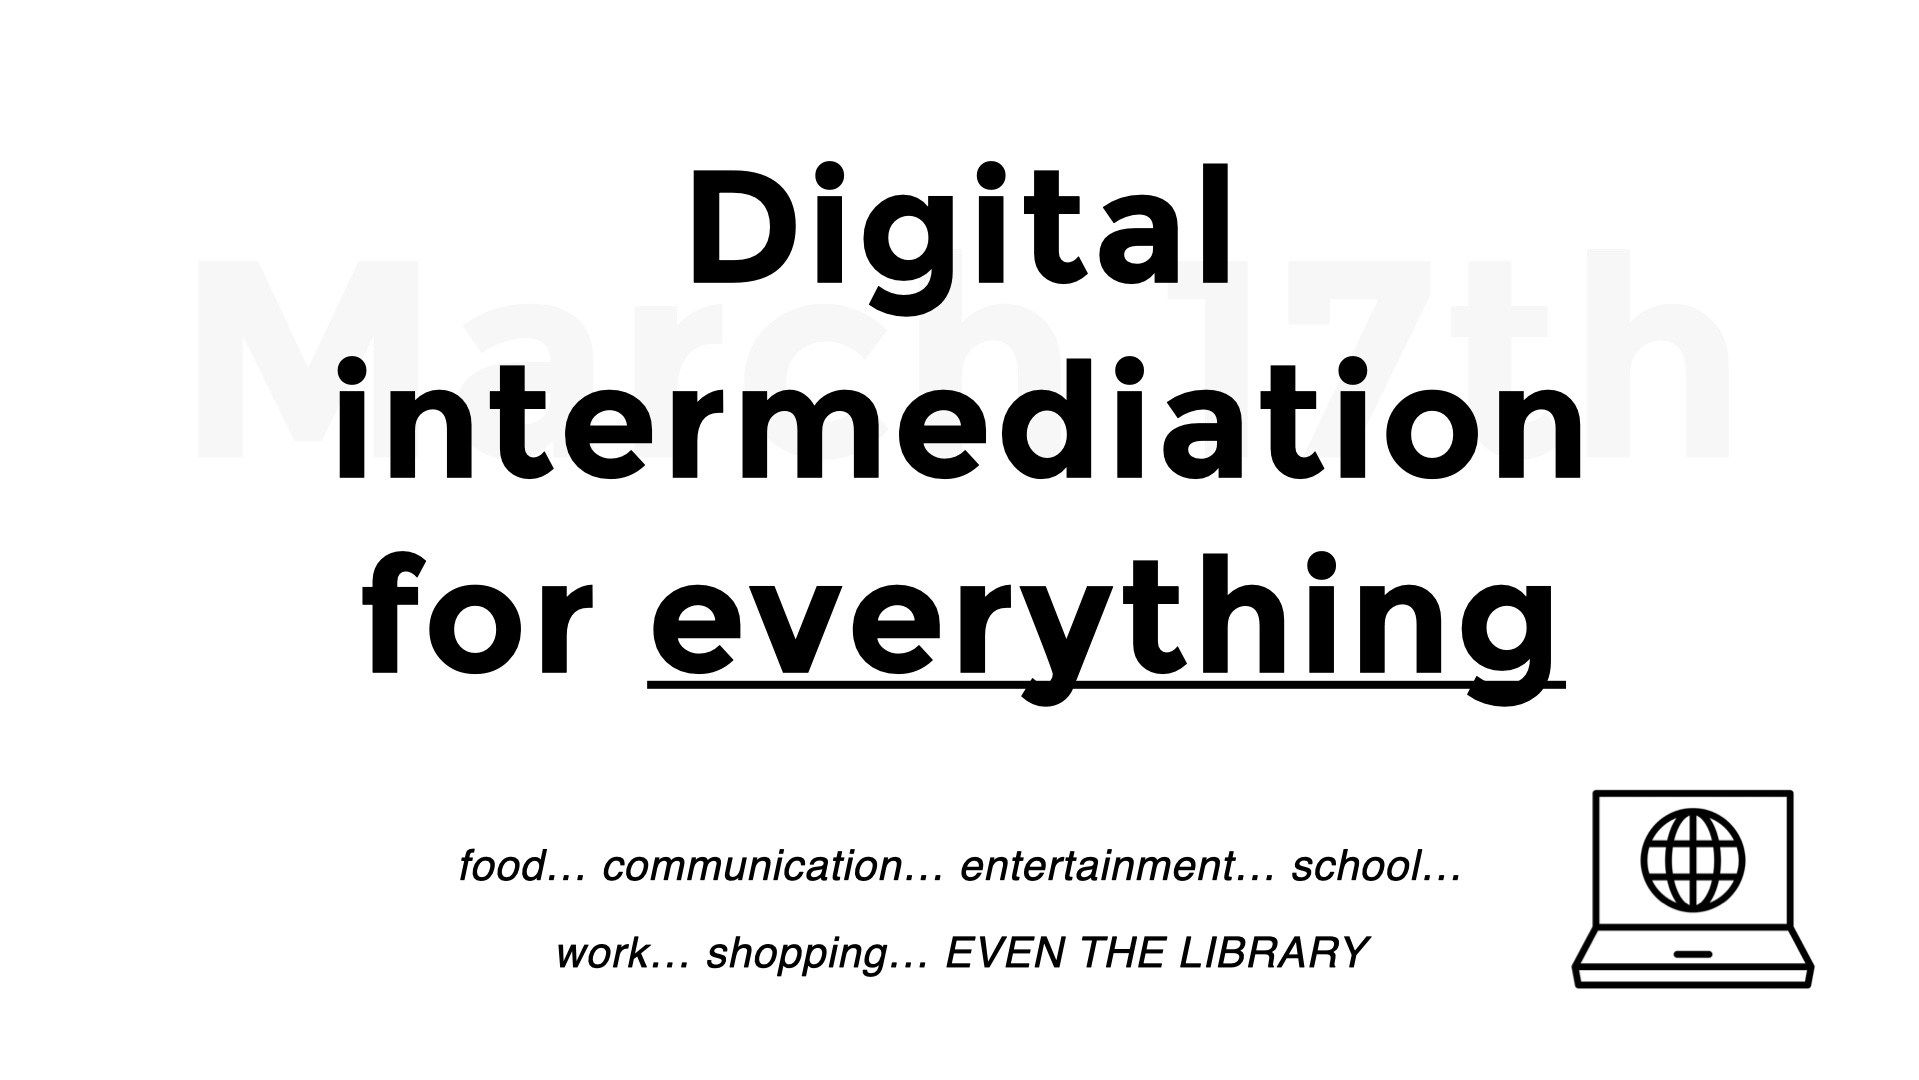 Slide with large text: Digital intermediation
for everything. Smaller text: foodâ€¦ communicationâ€¦ entertainmentâ€¦ schoolâ€¦ workâ€¦ shoppingâ€¦ EVEN THE LIBRARY